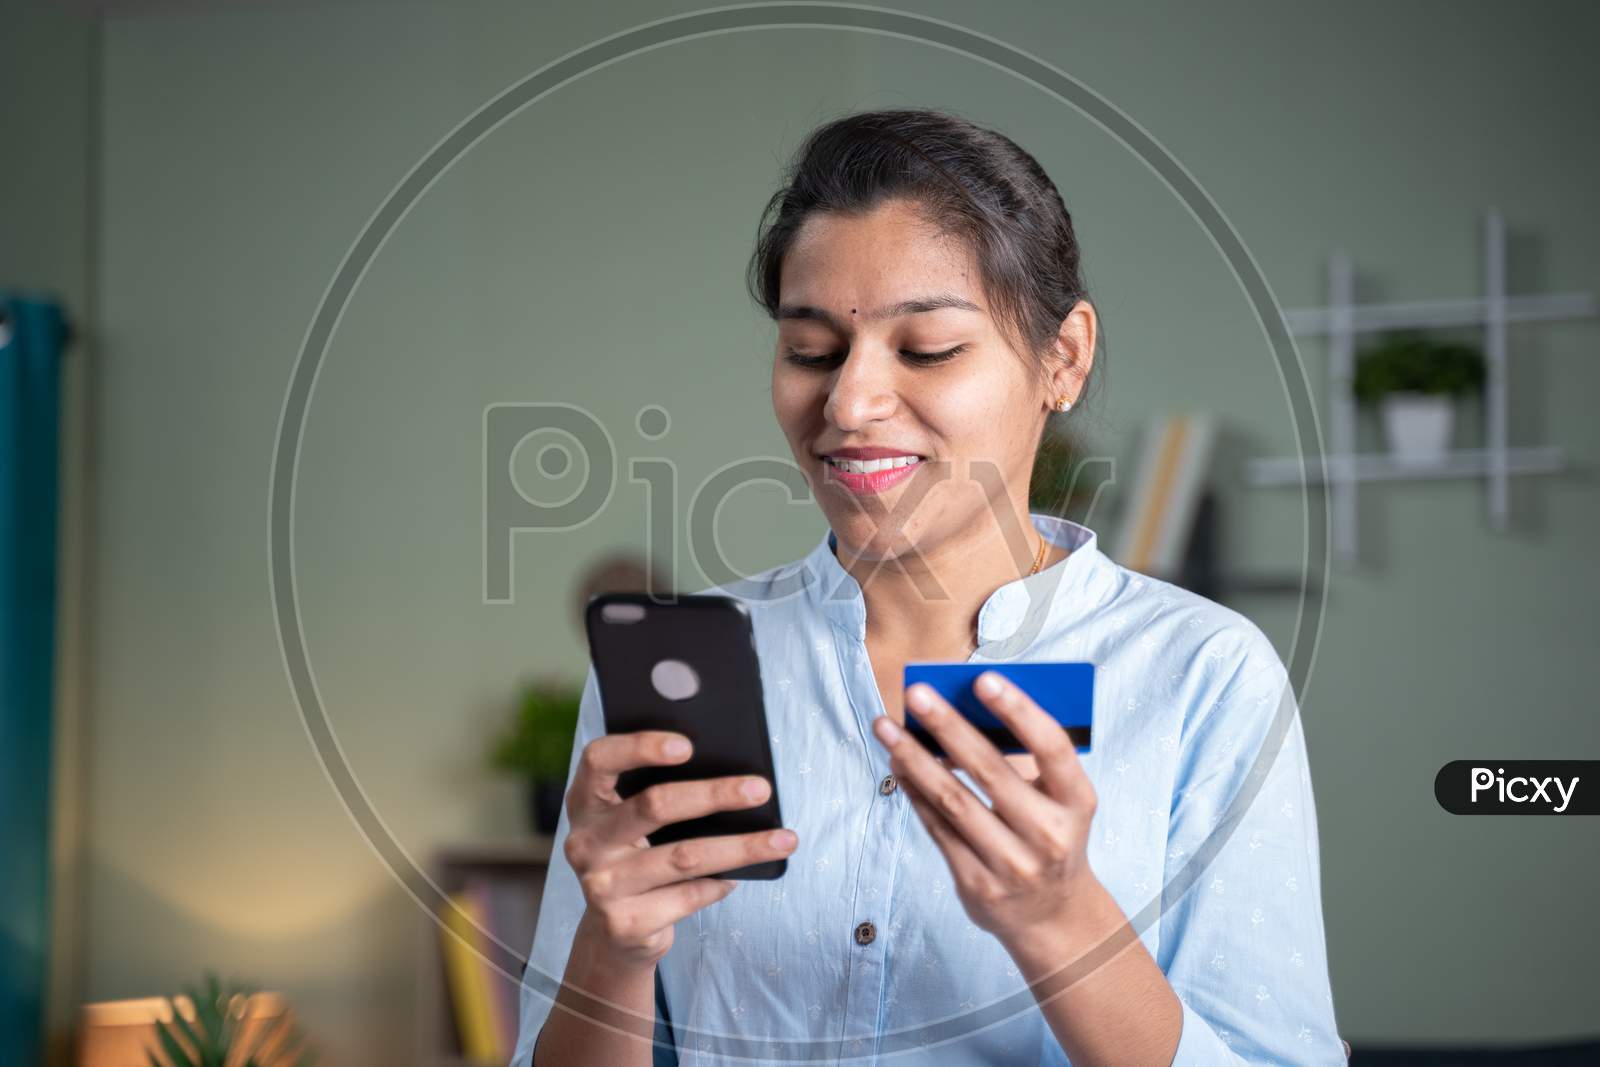 Young Indian Business Woman Entering Card Details On Mobile Phone For Online Purchase - Concept Of Digital Payment For Shopping, Internet Banking And Modern Technological Lifestyle.